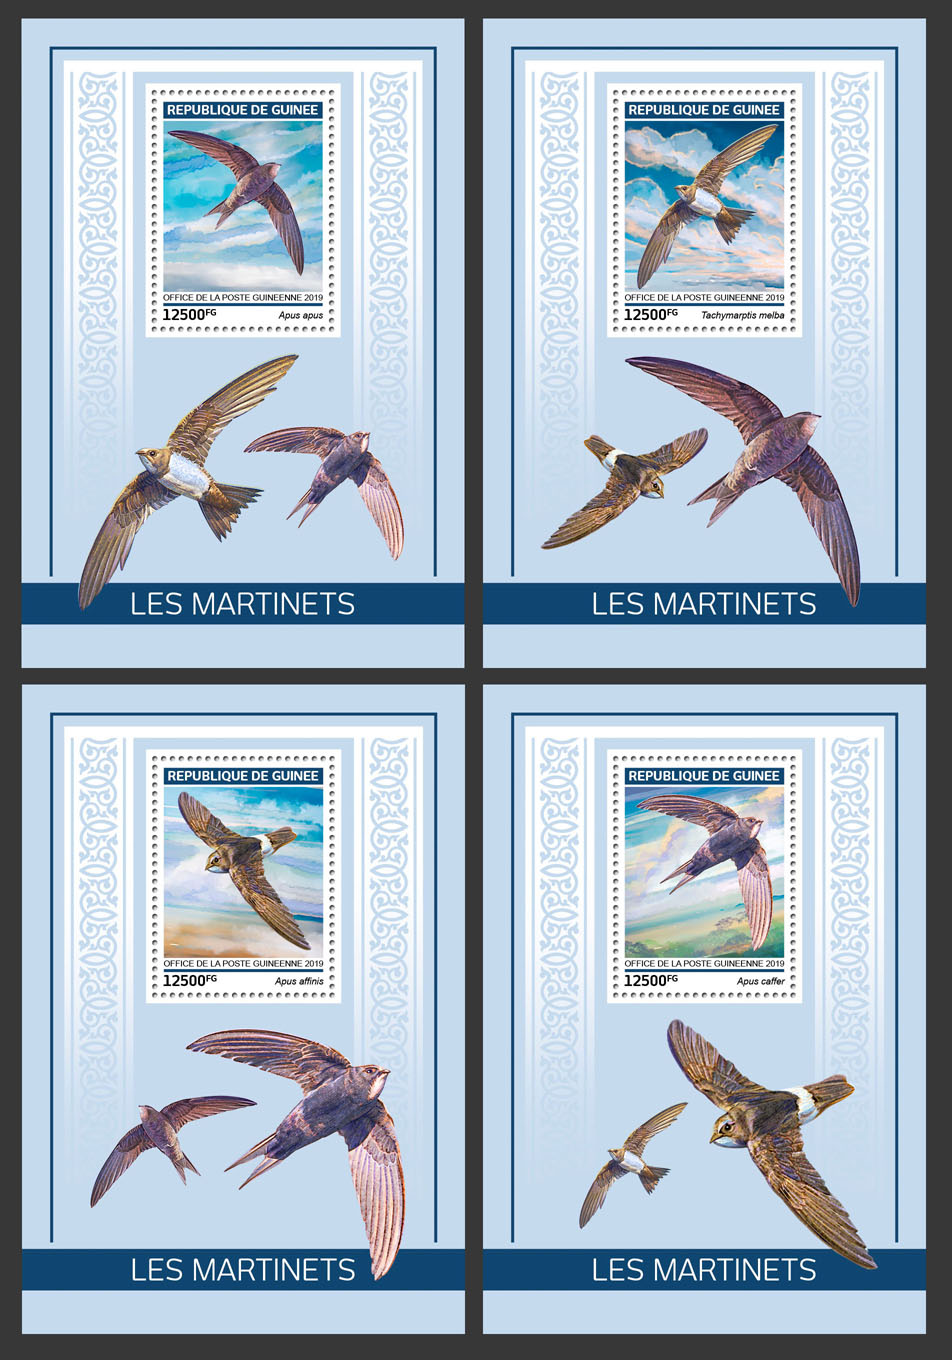 Swifts - Issue of Guinée postage stamps